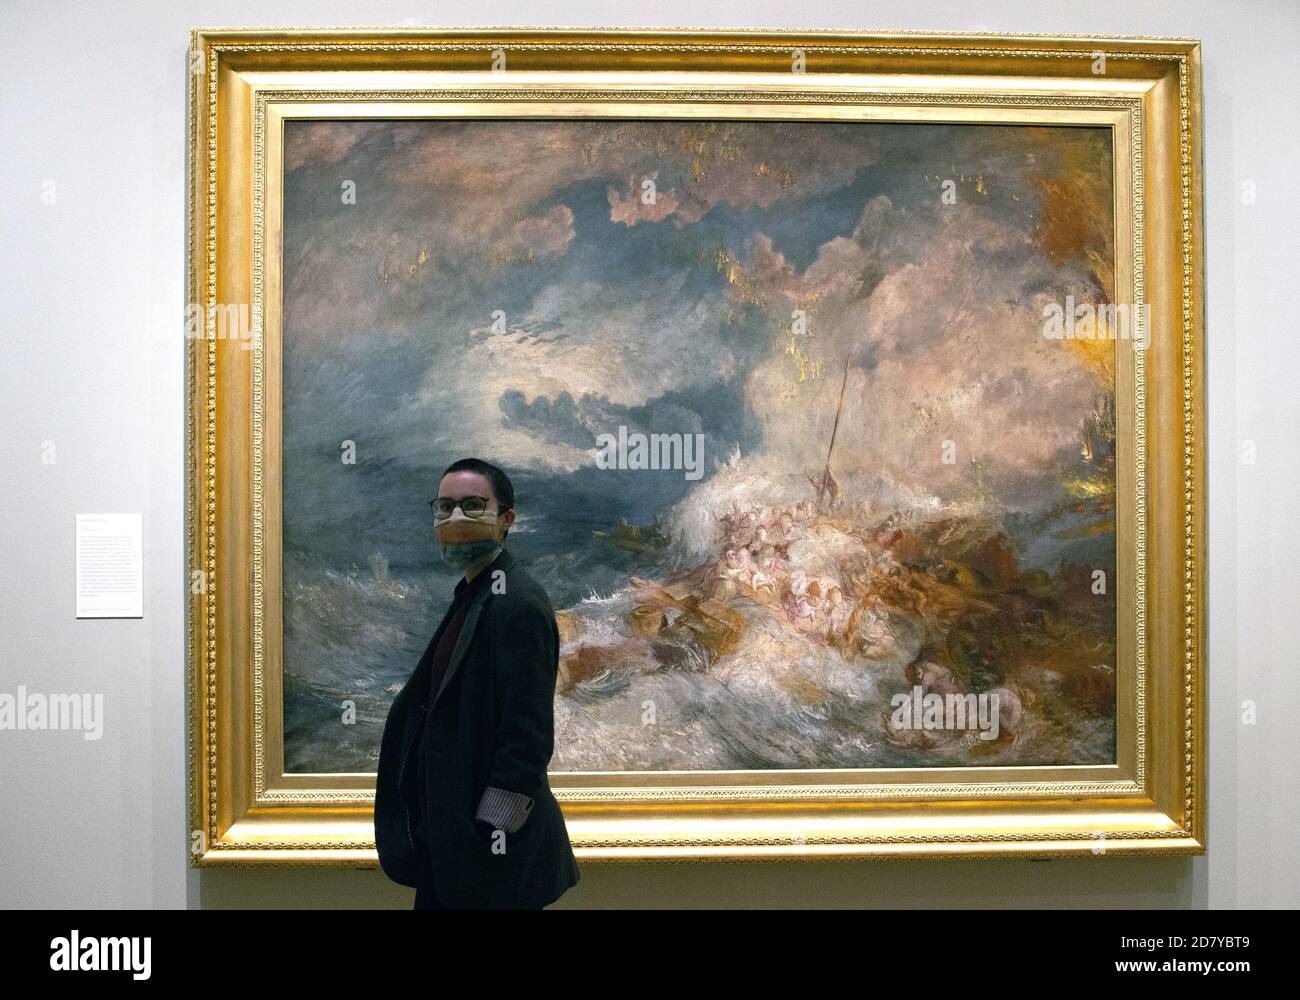 London, UK. 26th Oct, 2020. 'A Disaster at Sea' 1835. Landmark exhibition of J.M.W.Turner(1775-1851) with key paintings loaned from The National Gallery opening on October 28th. Credit: Mark Thomas/Alamy Live News Stock Photo